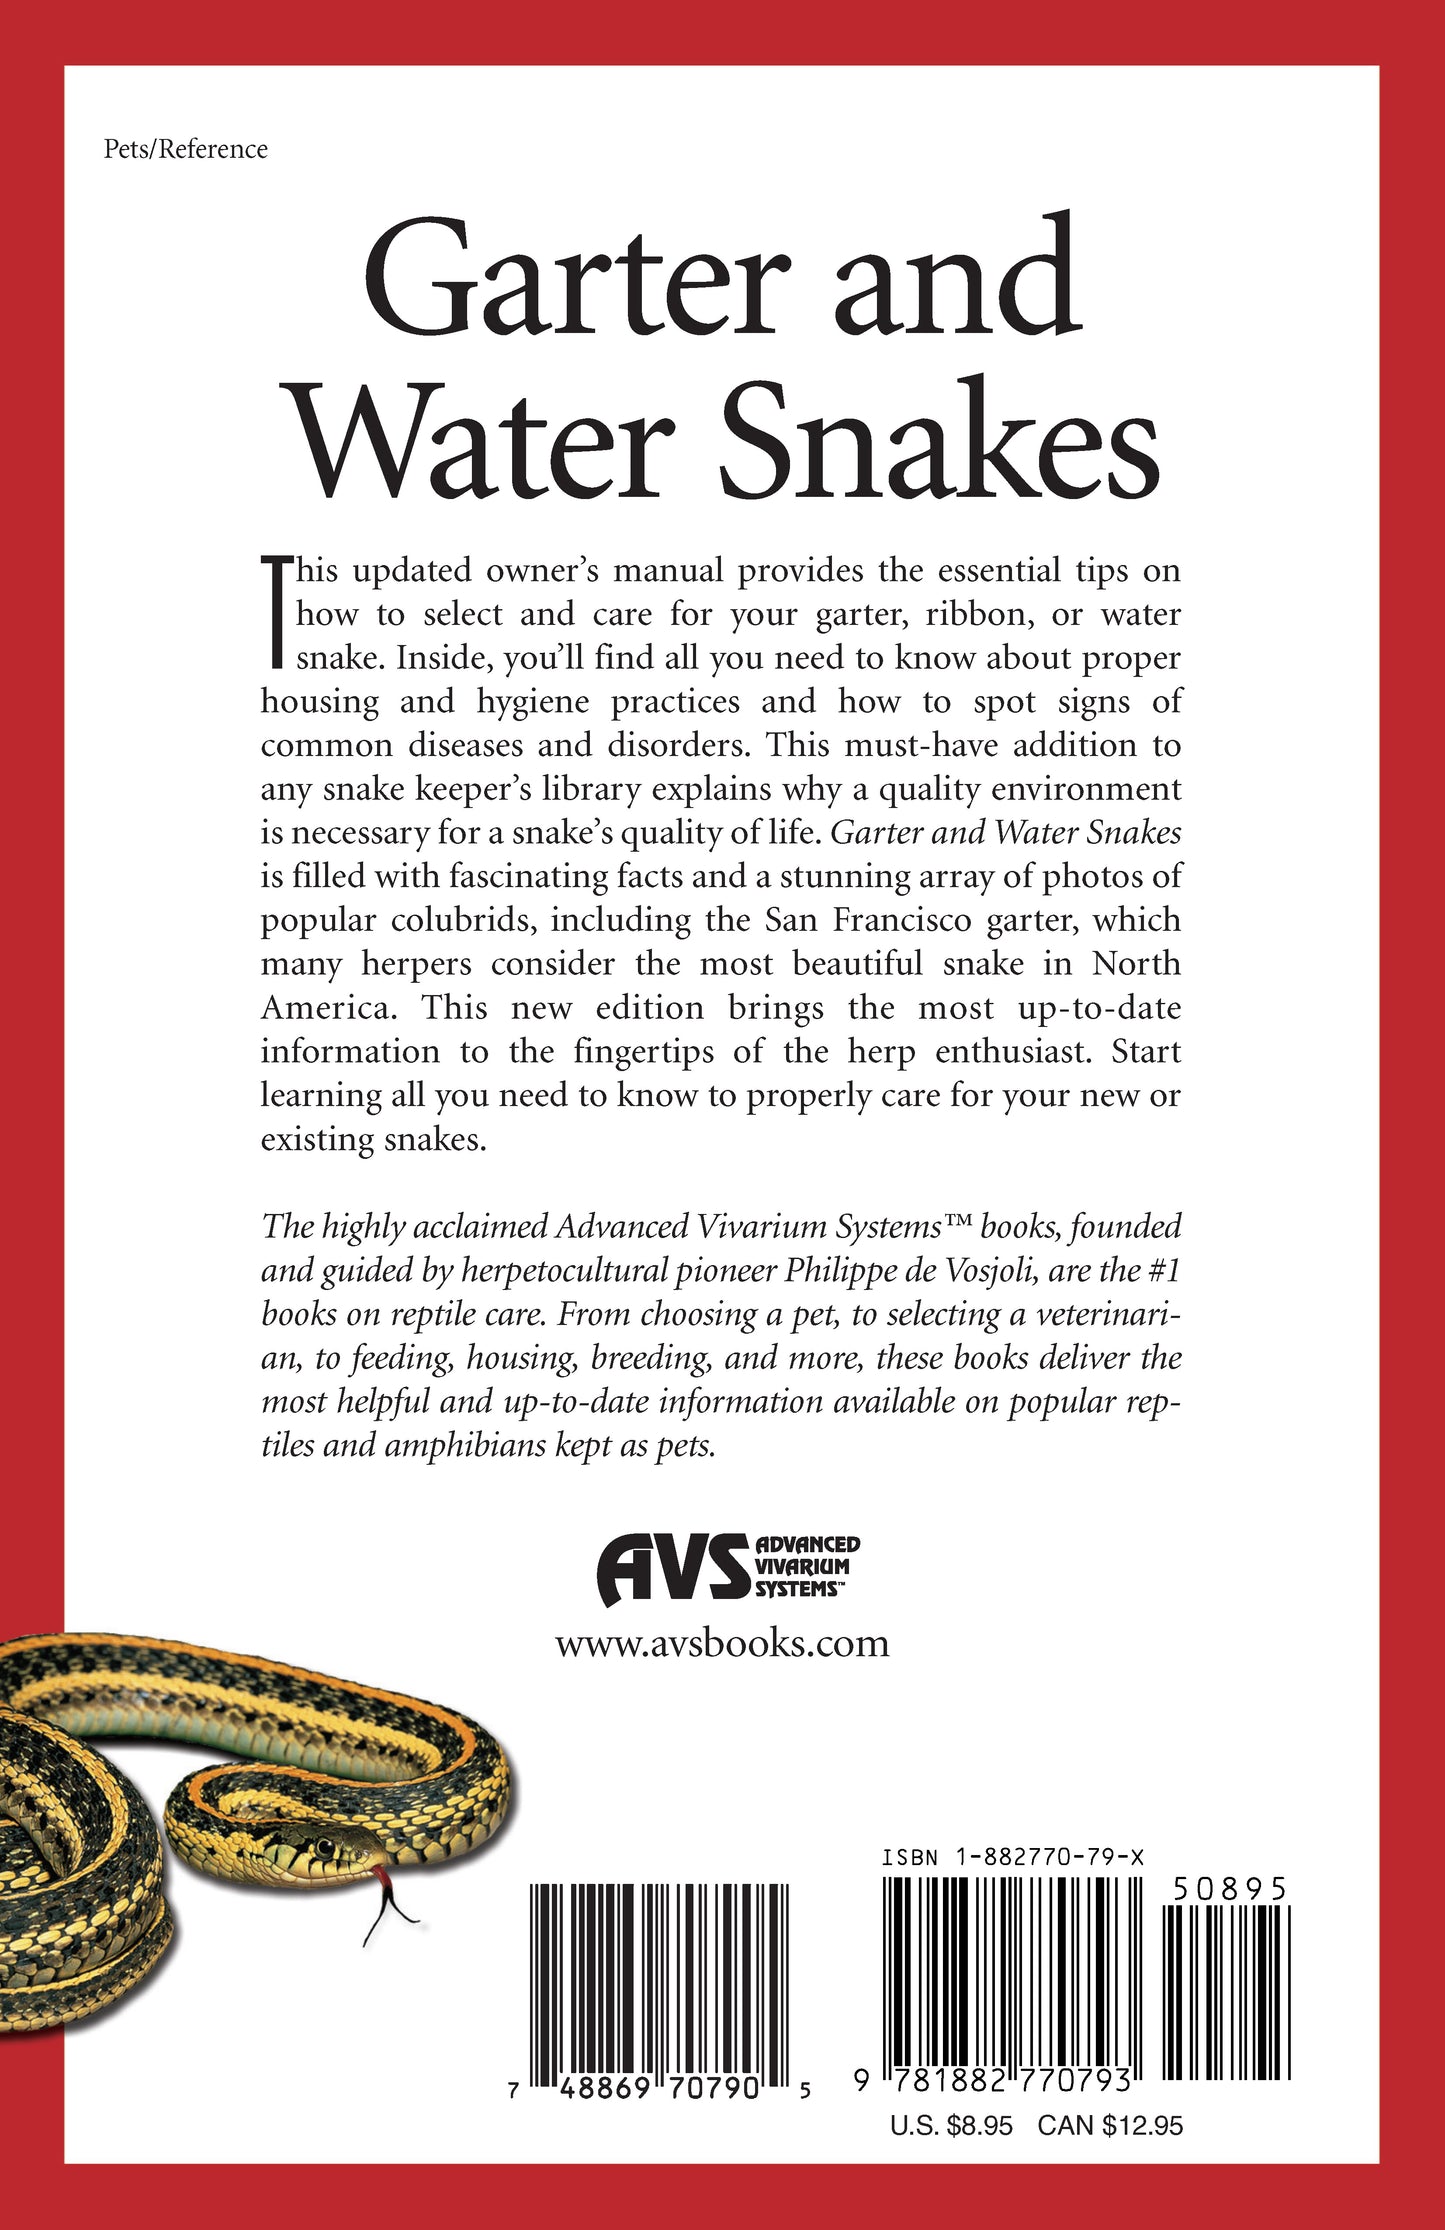 Garter Snakes and Water Snakes